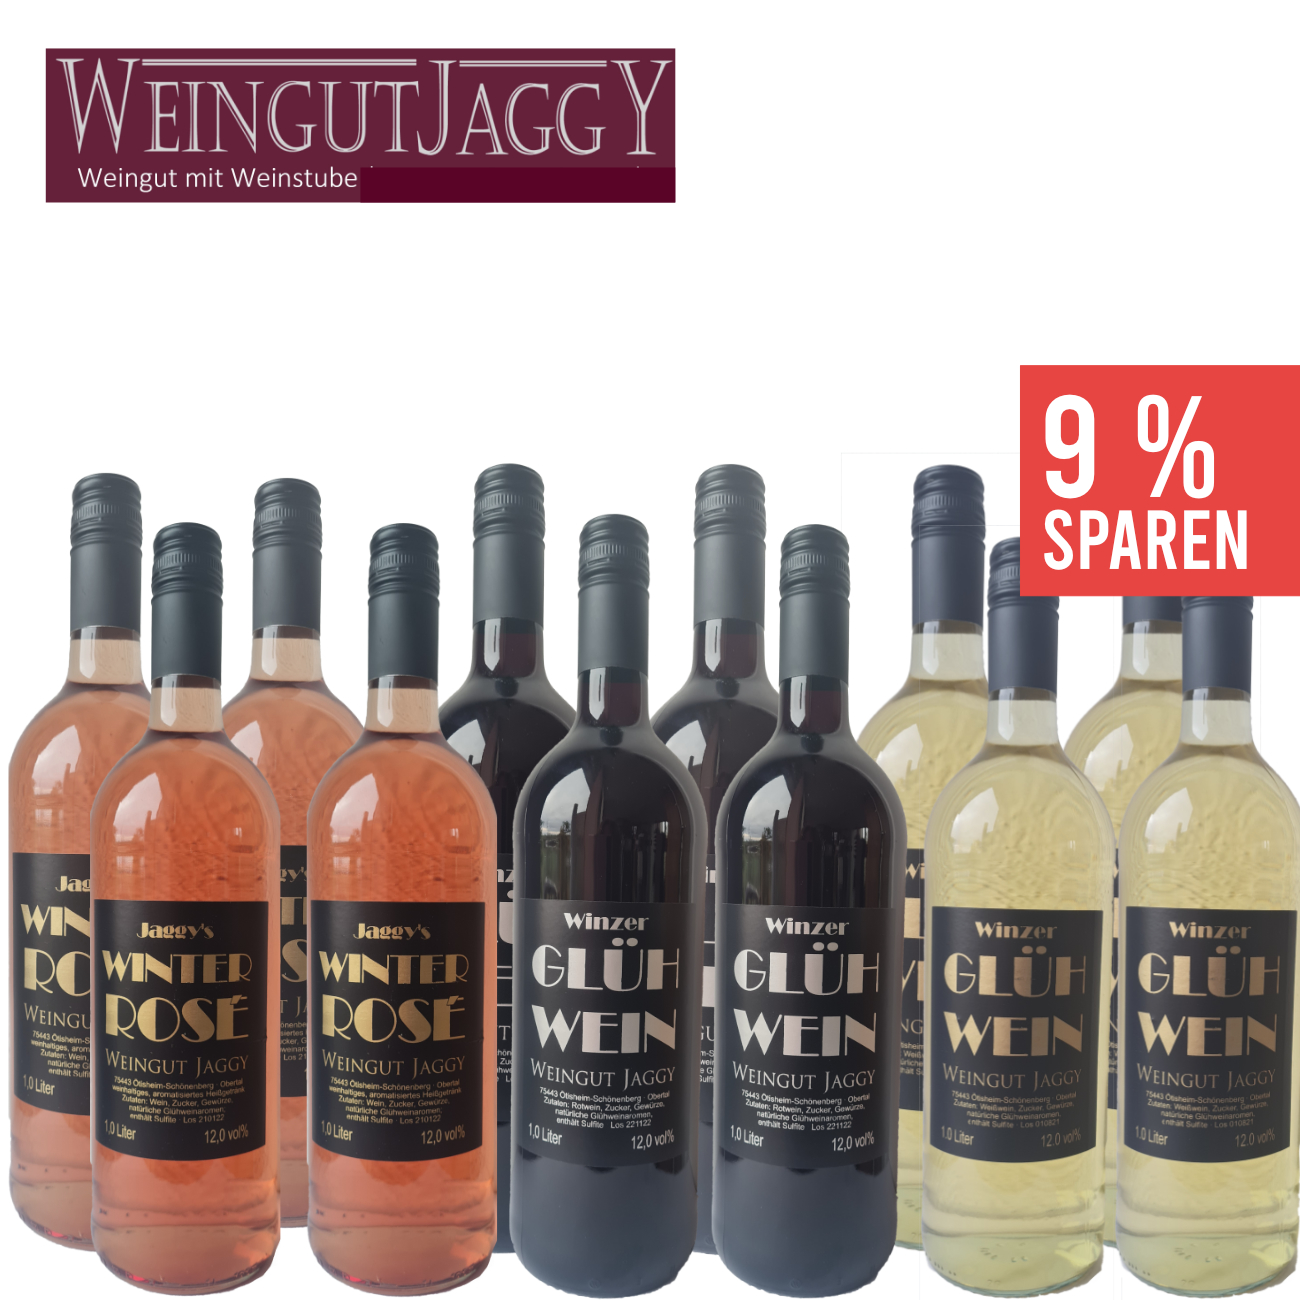 wein.plus find+buy: The members find+buy | wines our wein.plus of